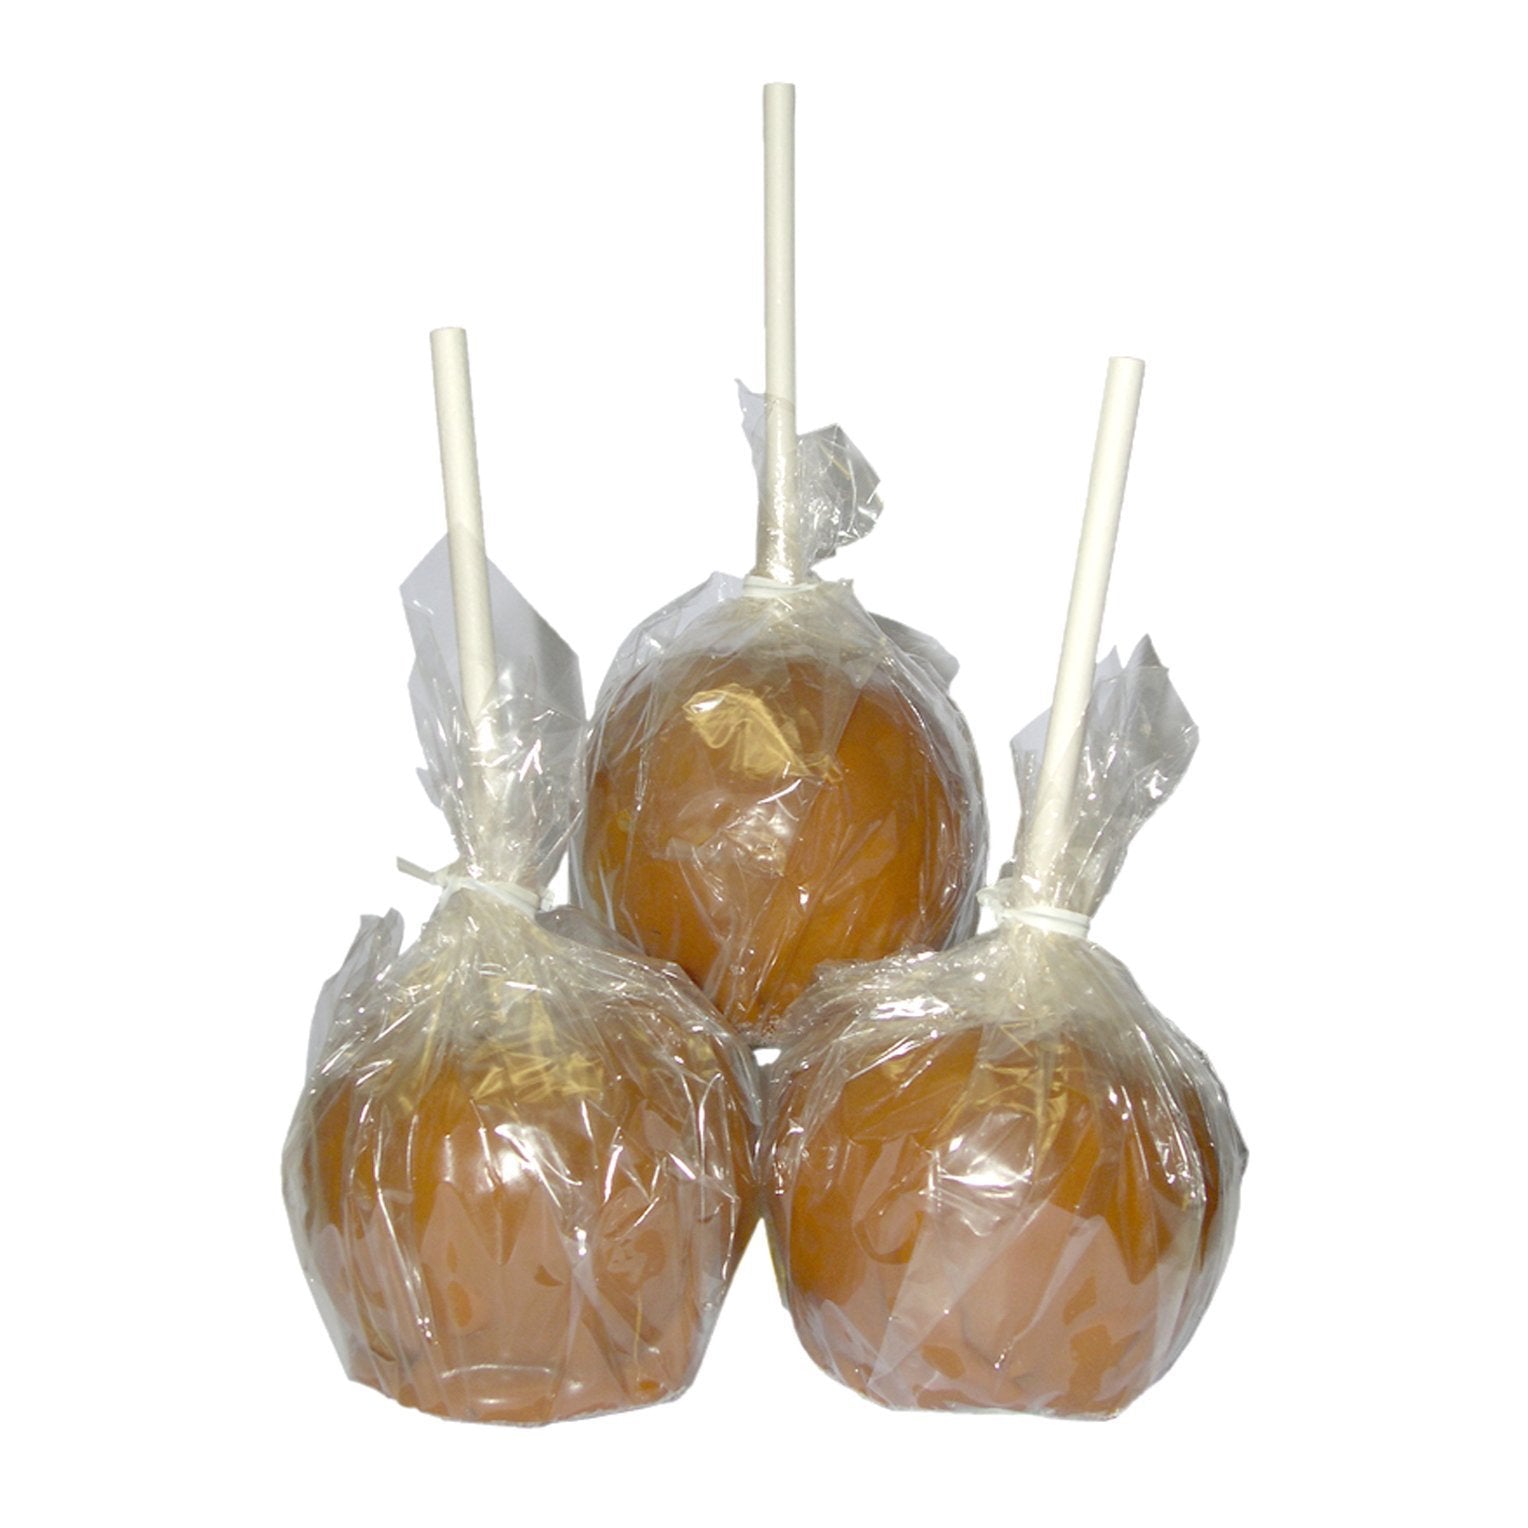 Apple Cello Wrap Bags & Ties (Pack of 1000)